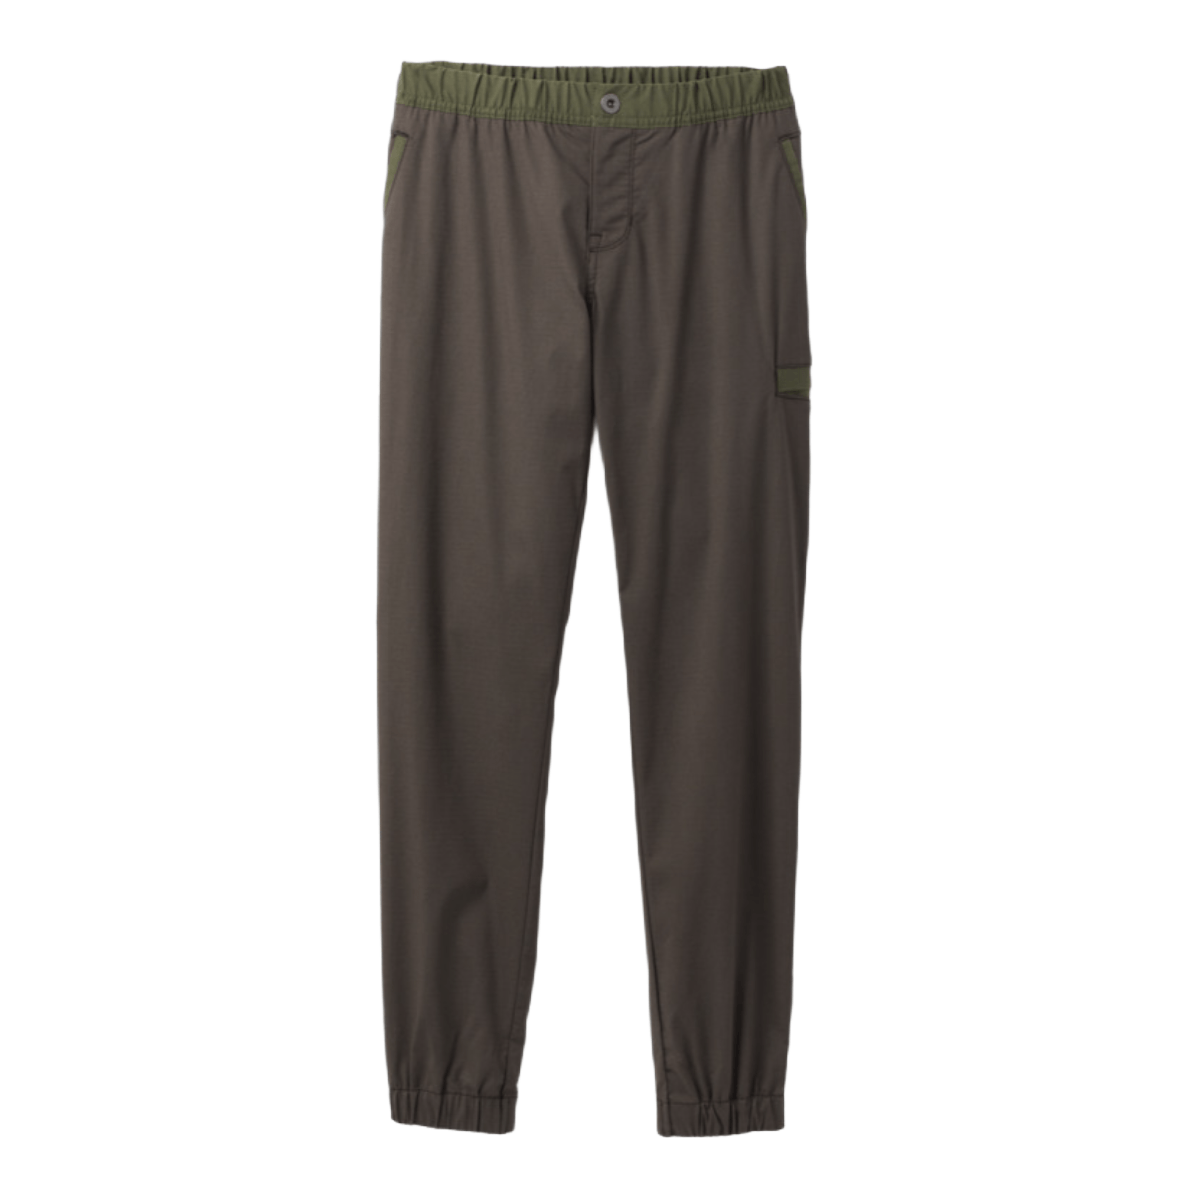 Outdoor Research Ferrosi Convertible Pant - Women's 